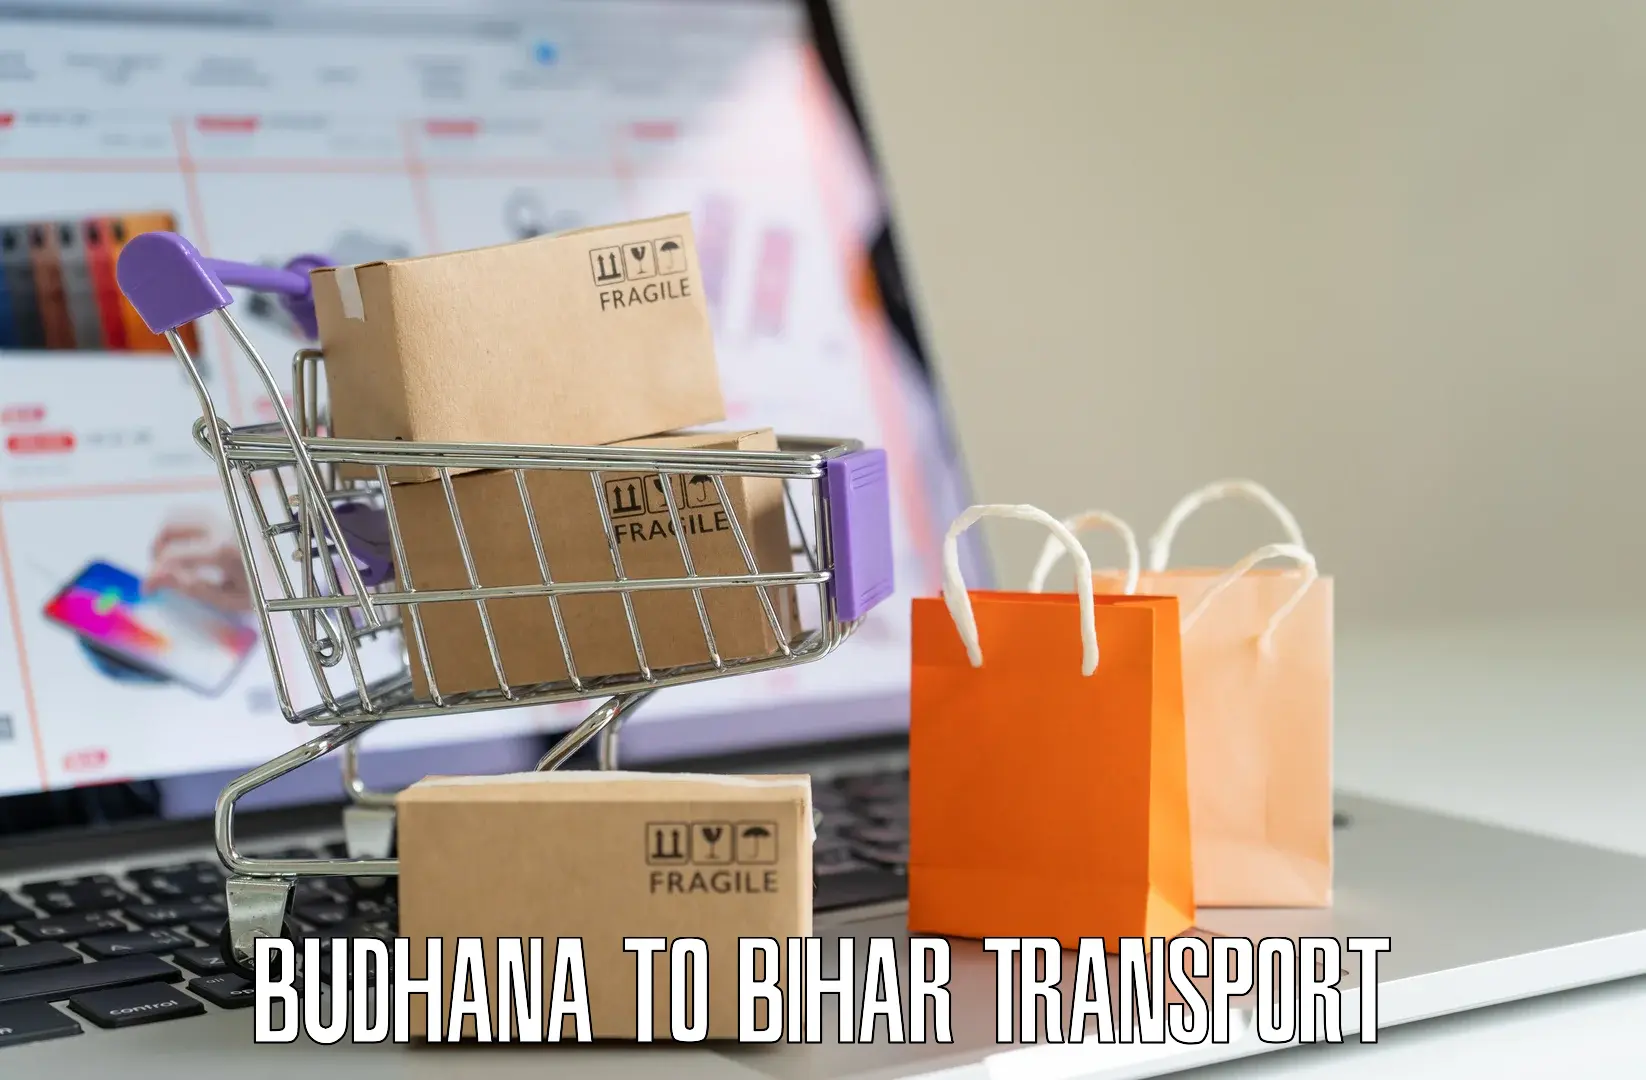 Road transport services in Budhana to Bihar